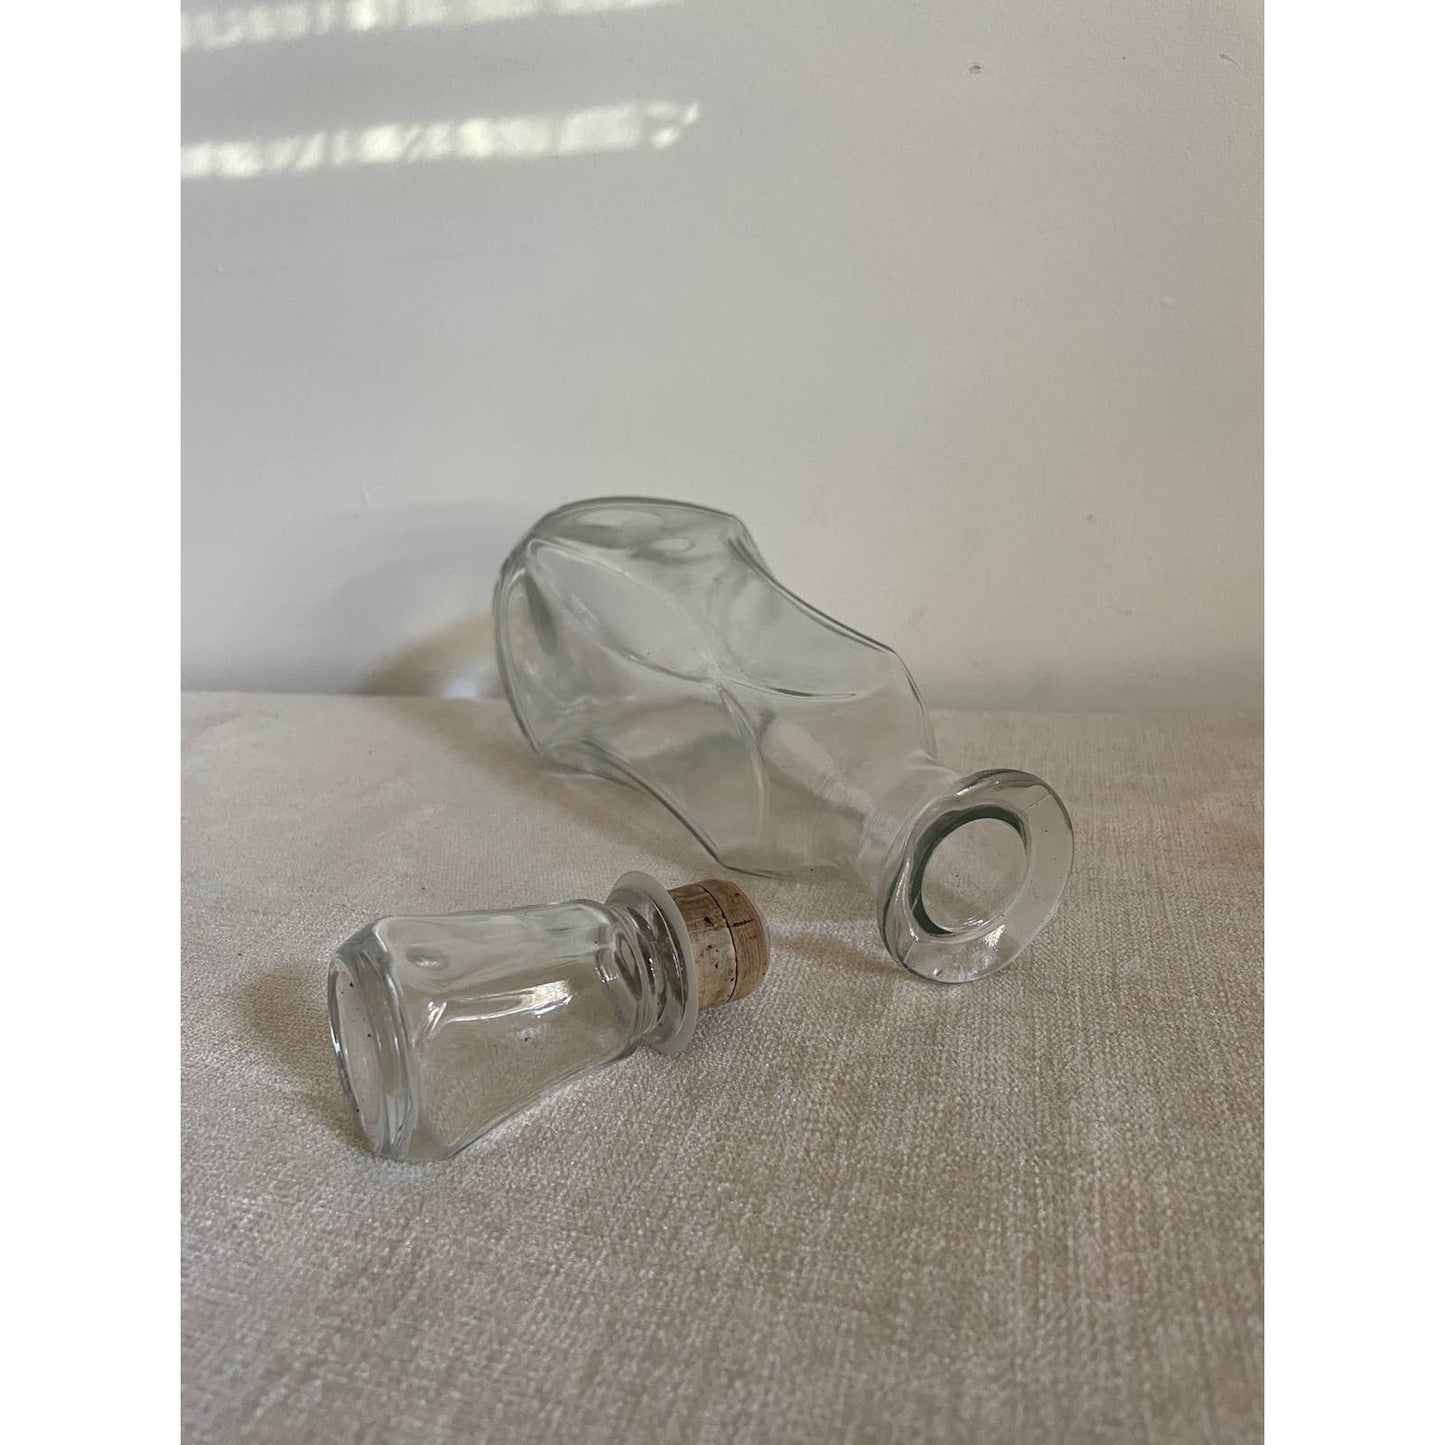 Antique Vintage Clear Glass Eight-Sided Decanter by Owens Illinois Glass Co